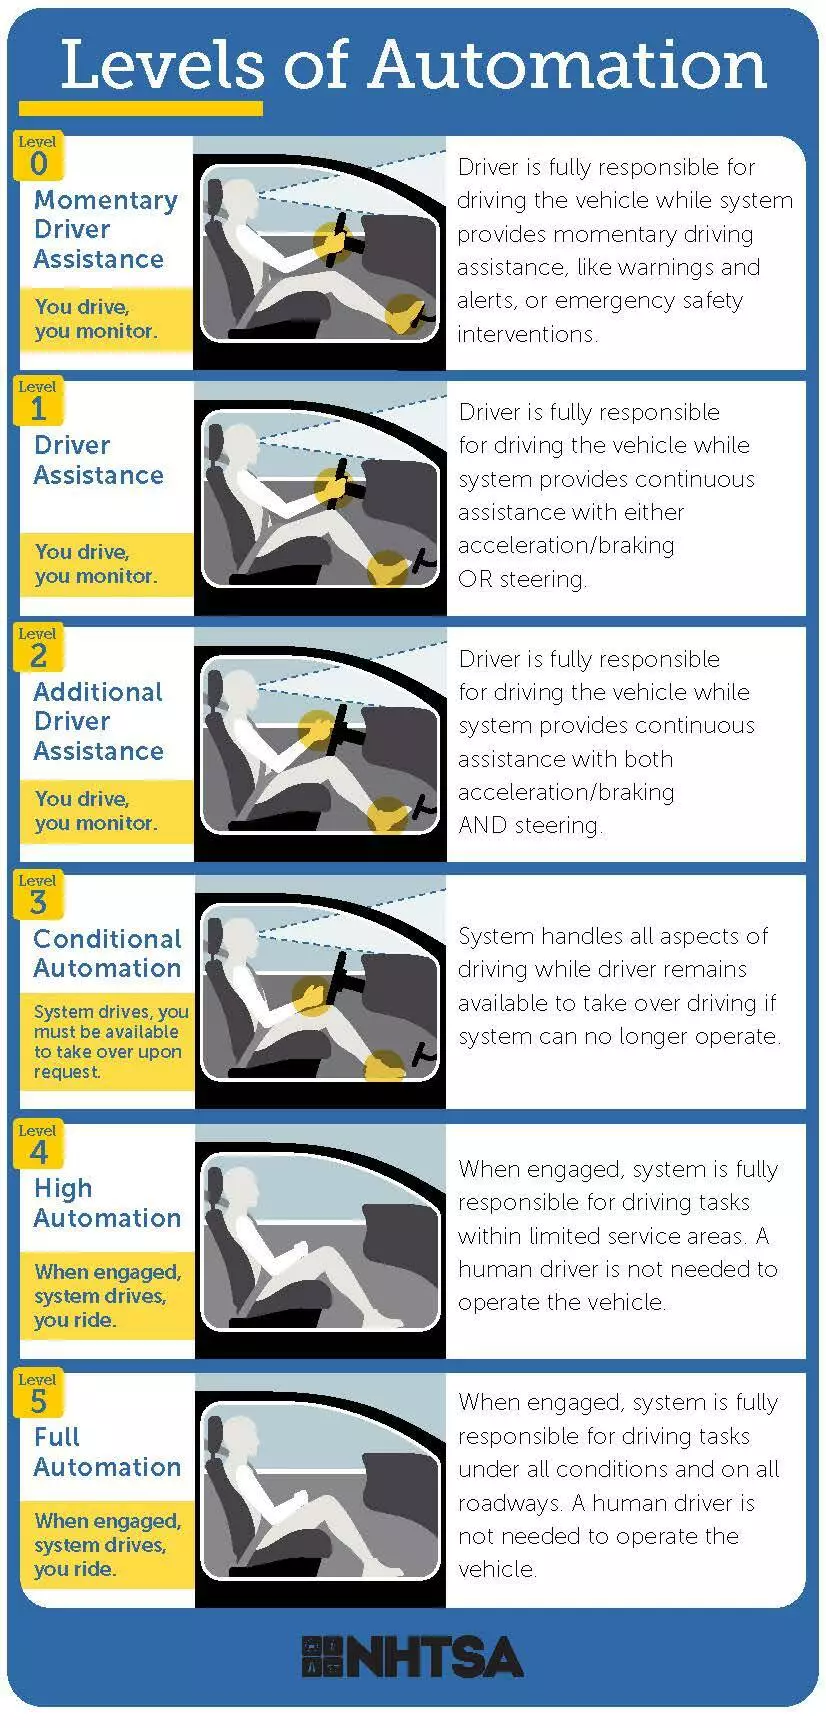 Five levels of vehicle automation, as defined by the Society of Automotive Engineers (SAE).